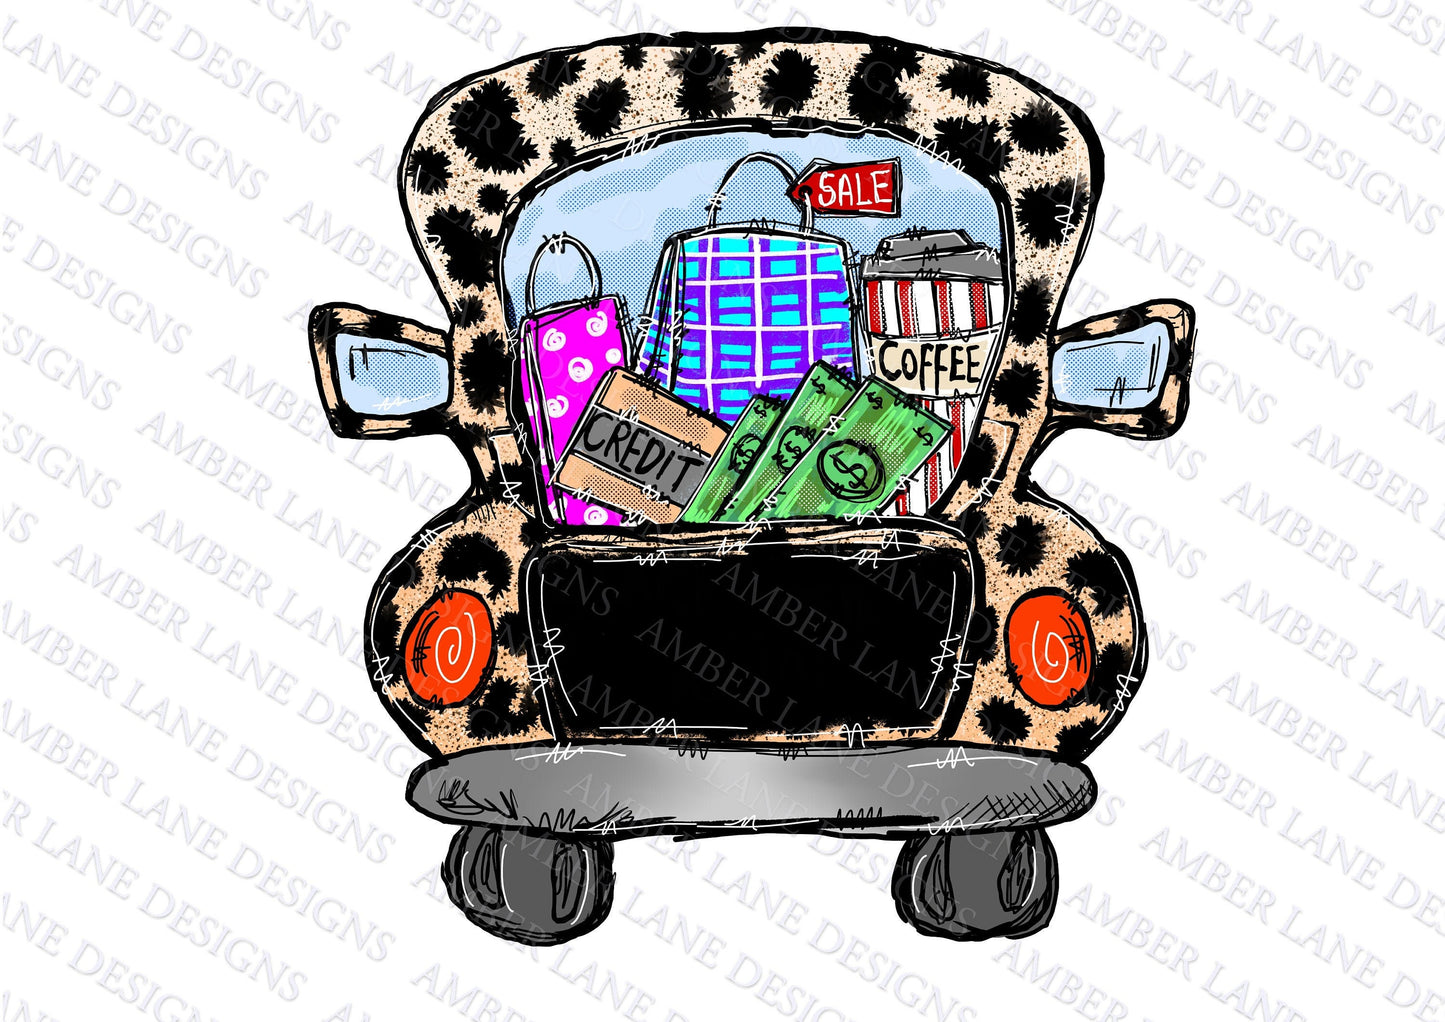 Black Friday Squad Leopard Truck no text, Sublimation png file (add your own text)